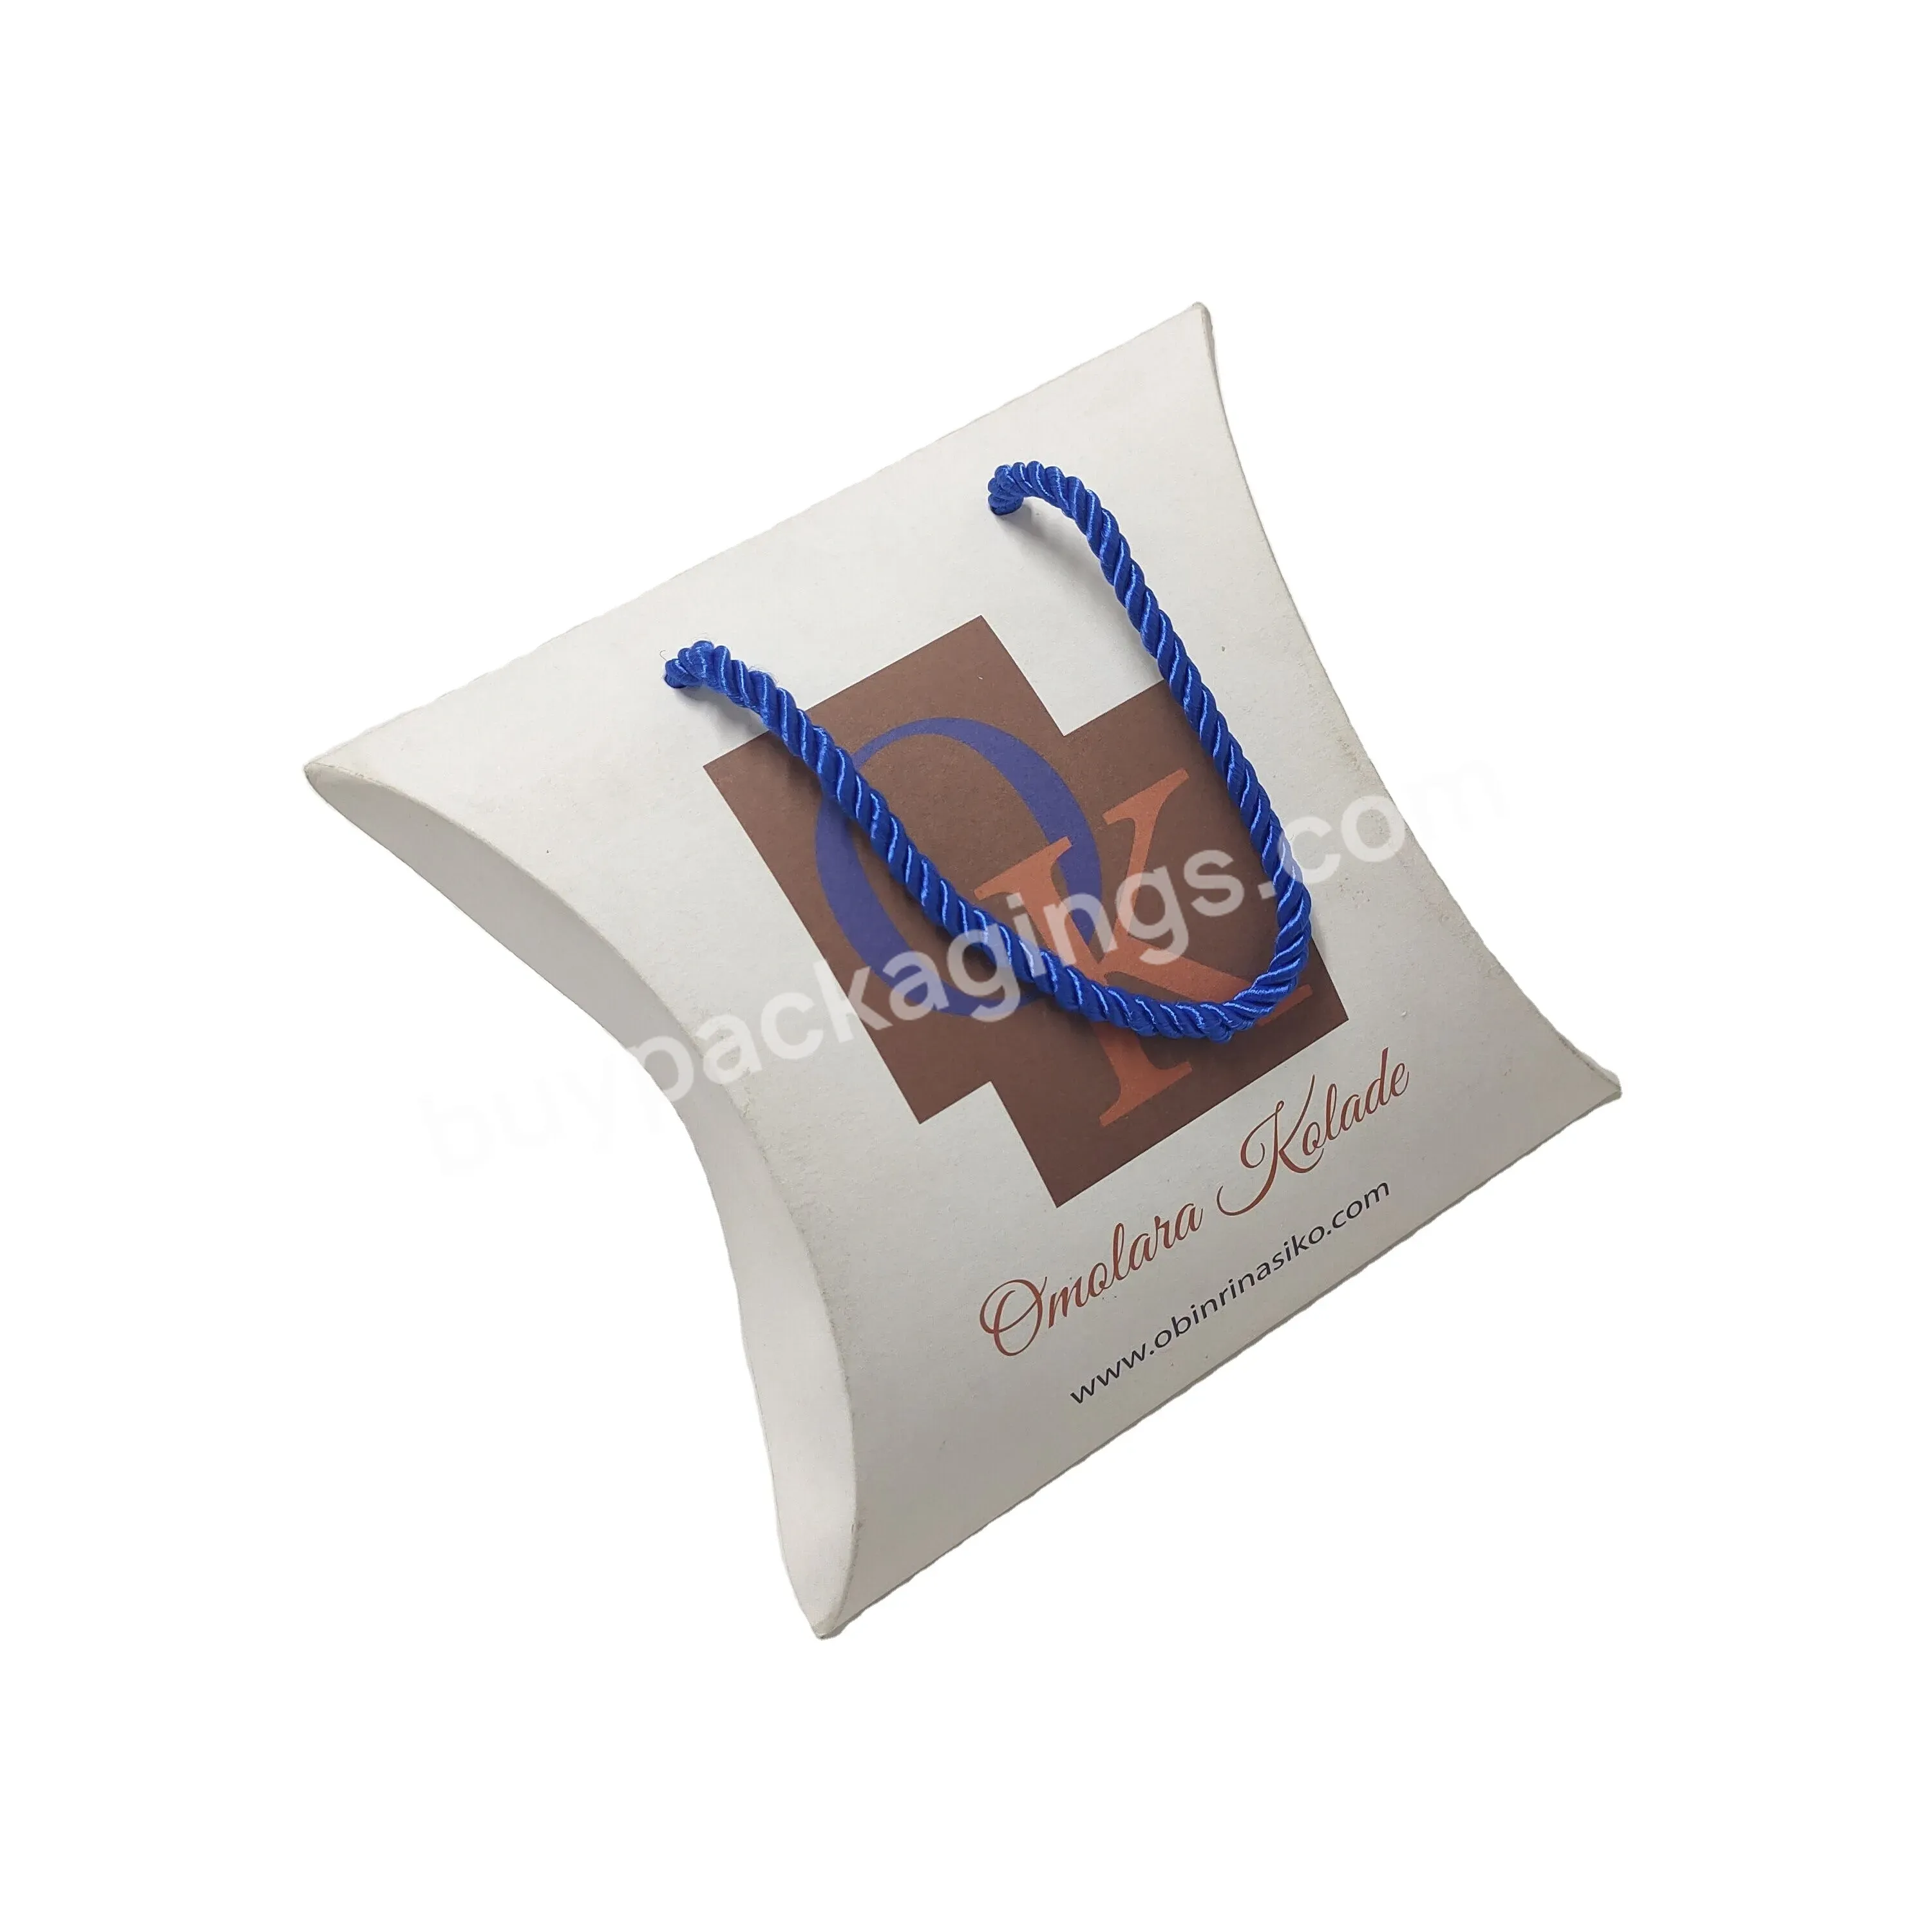 Custom Design Logo Printed Pillow Box For Colorful Pillow Chocolate Box Gift Box Packaging